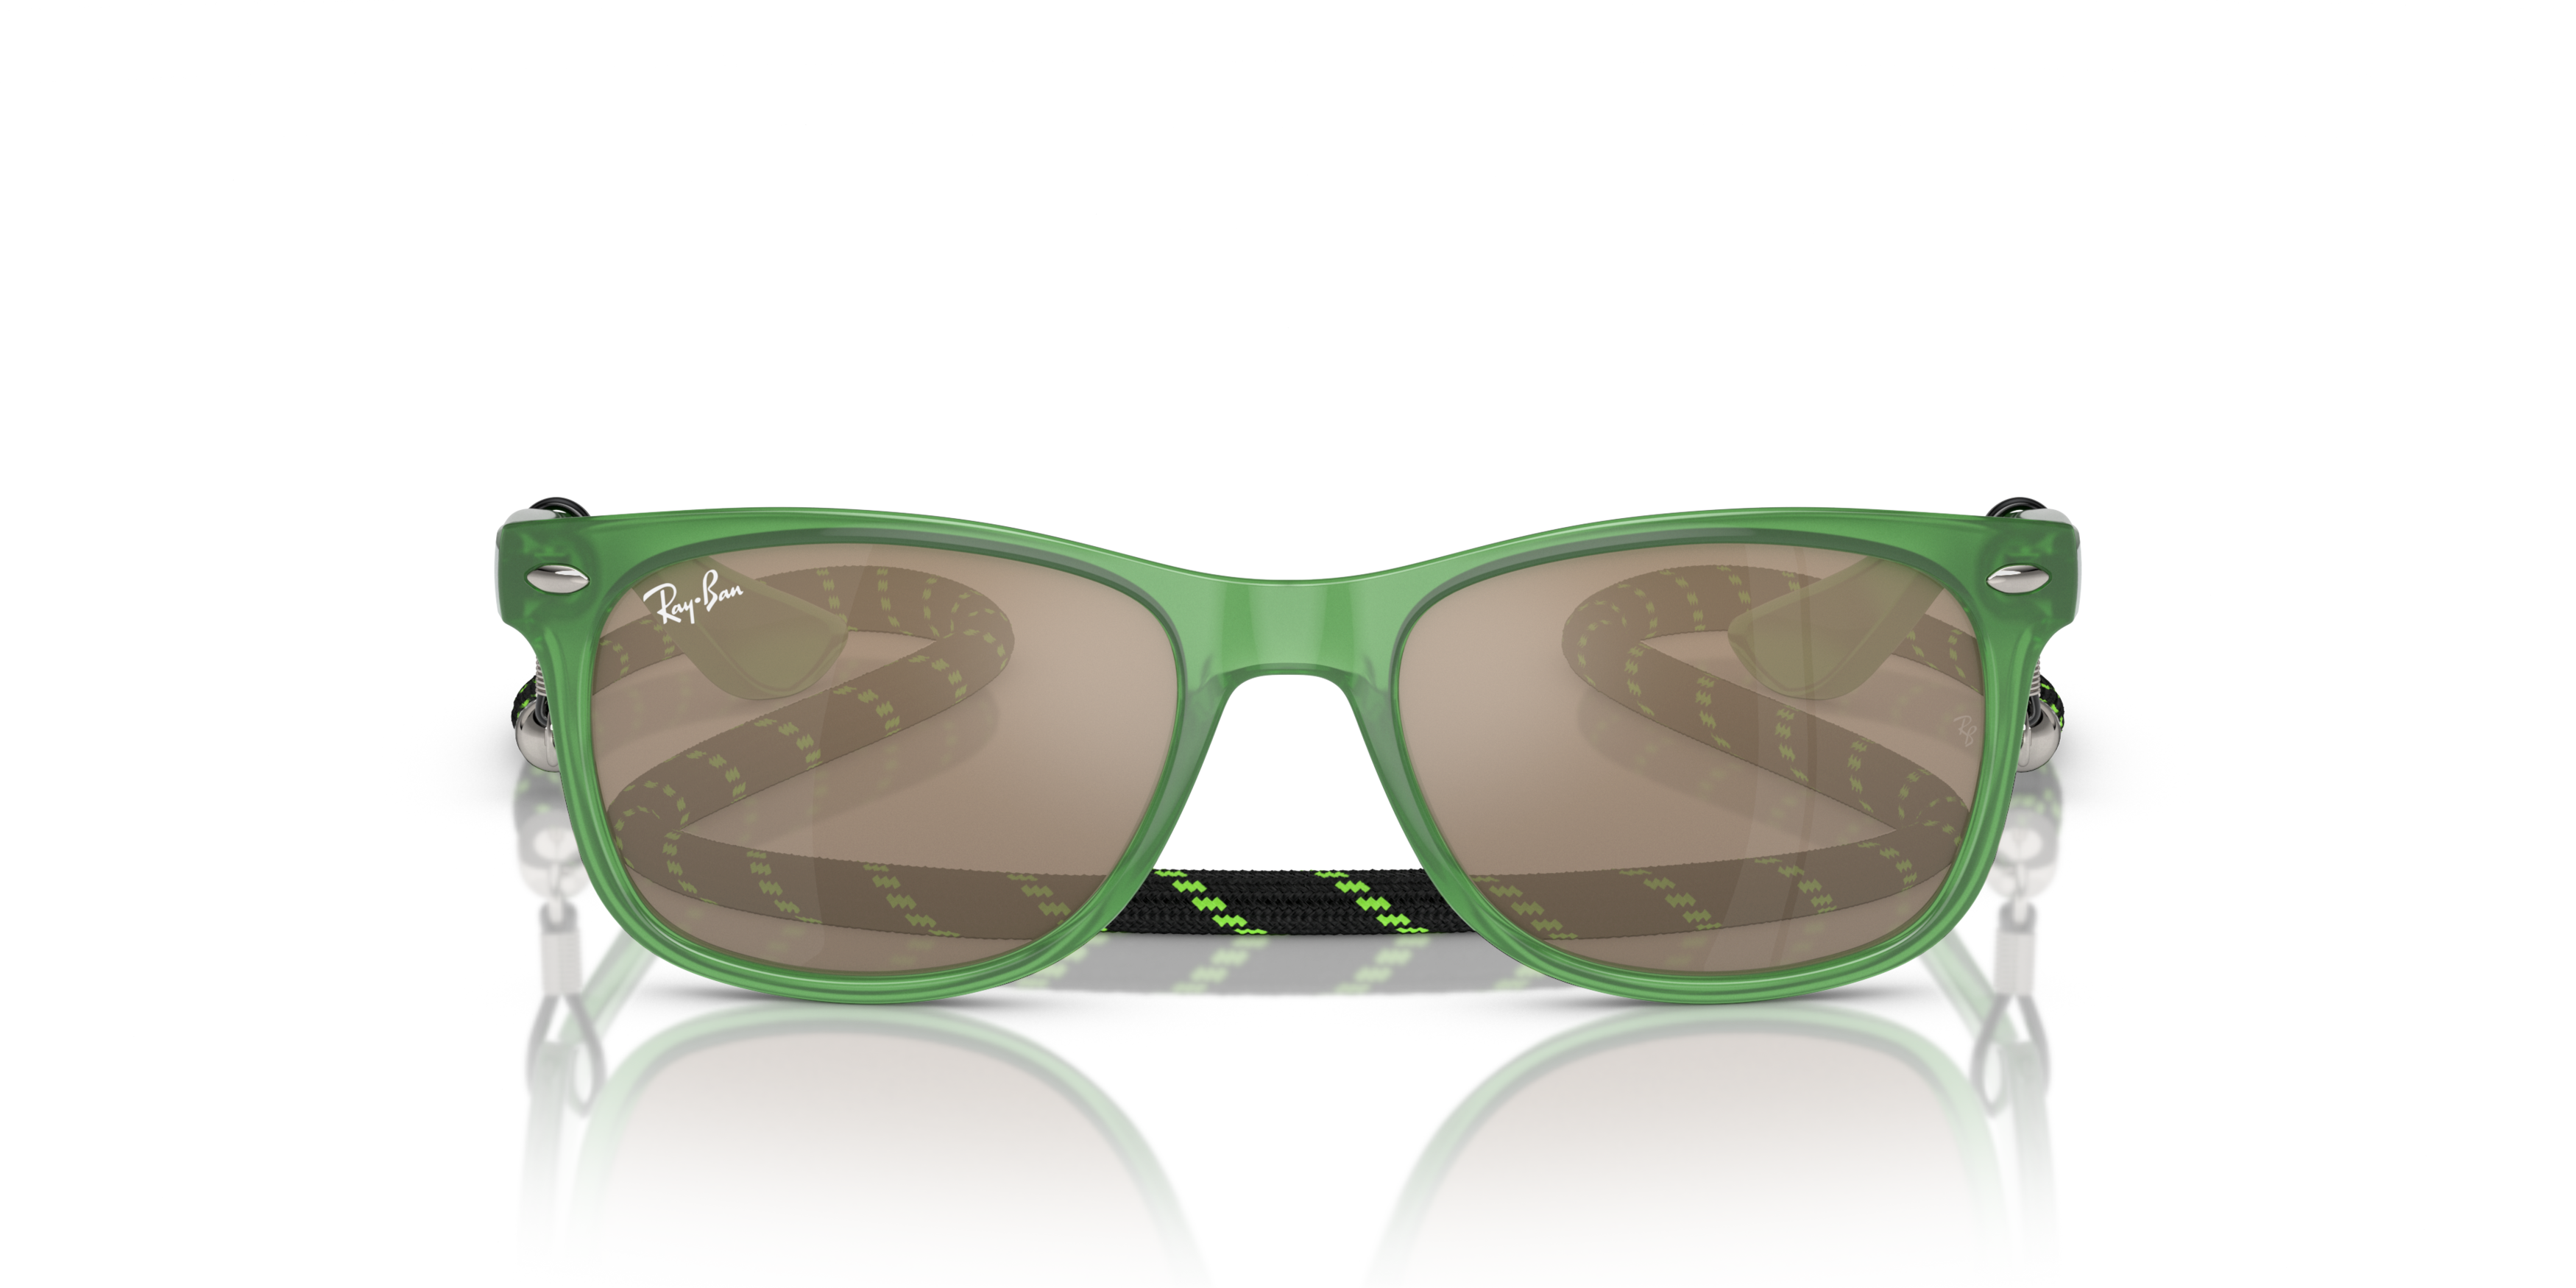 [products.image.front] RAY-BAN RJ9052S 71465A